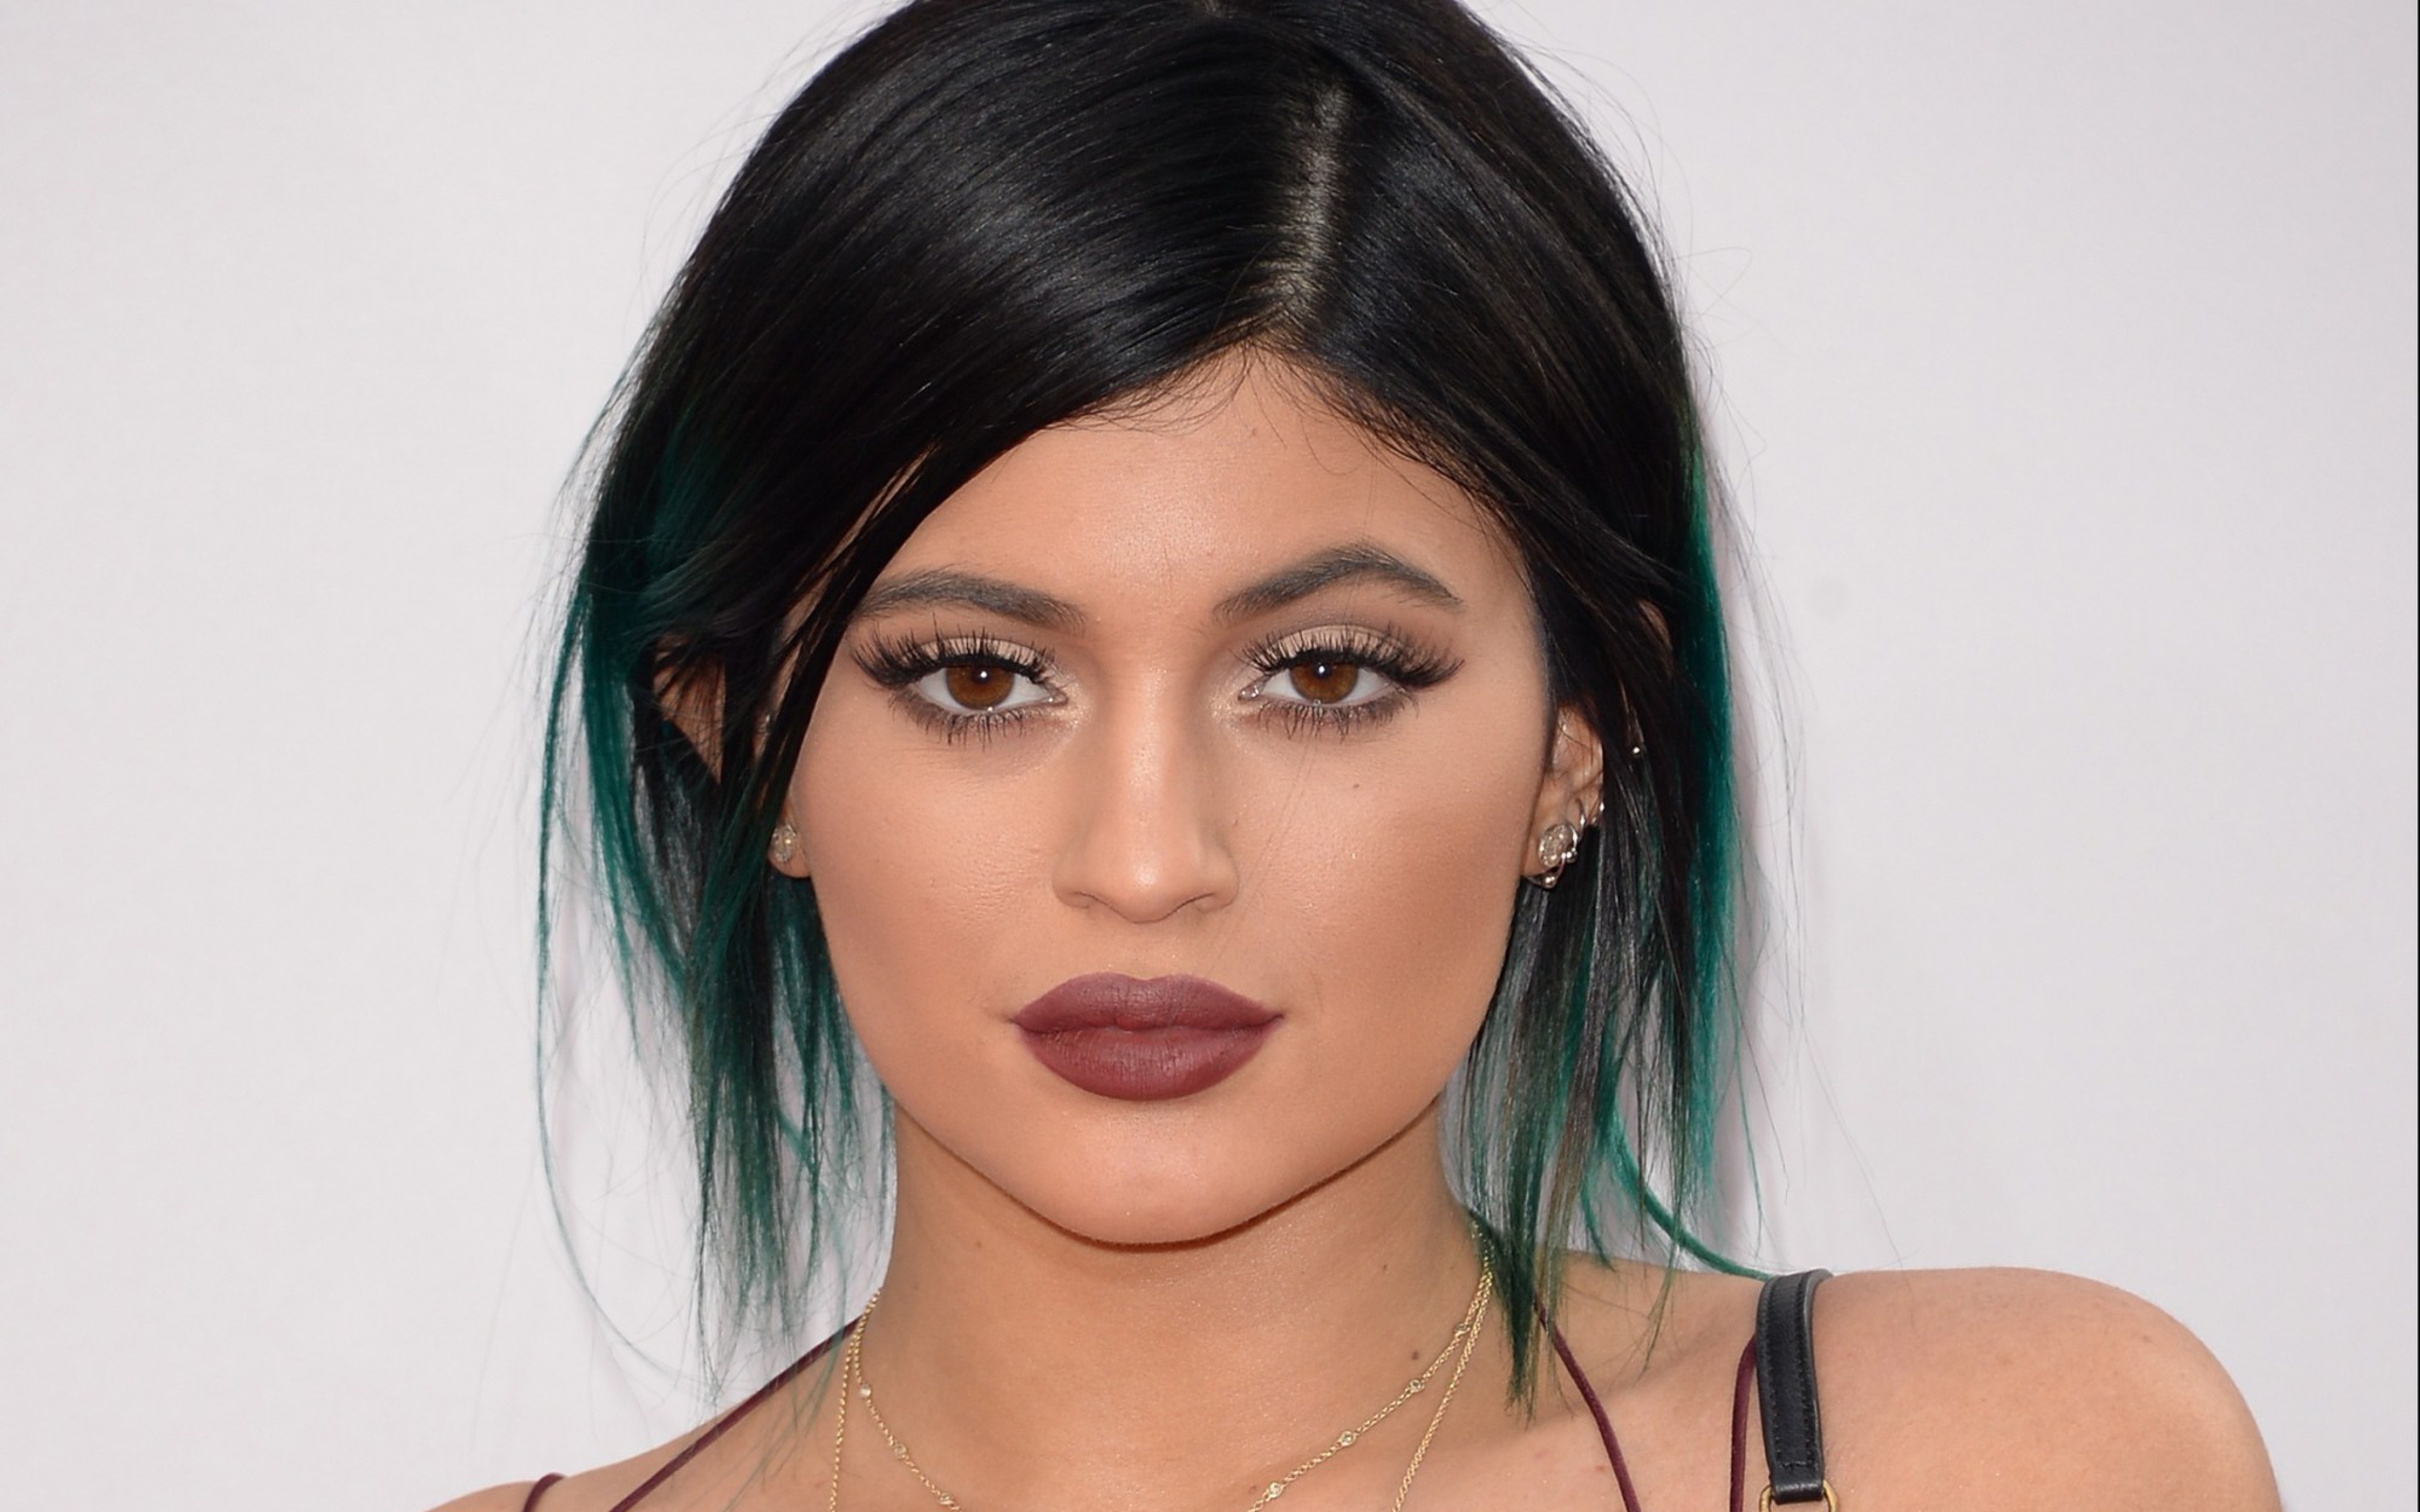 Kylie Jenner Wallpaper Image Photo Picture Background